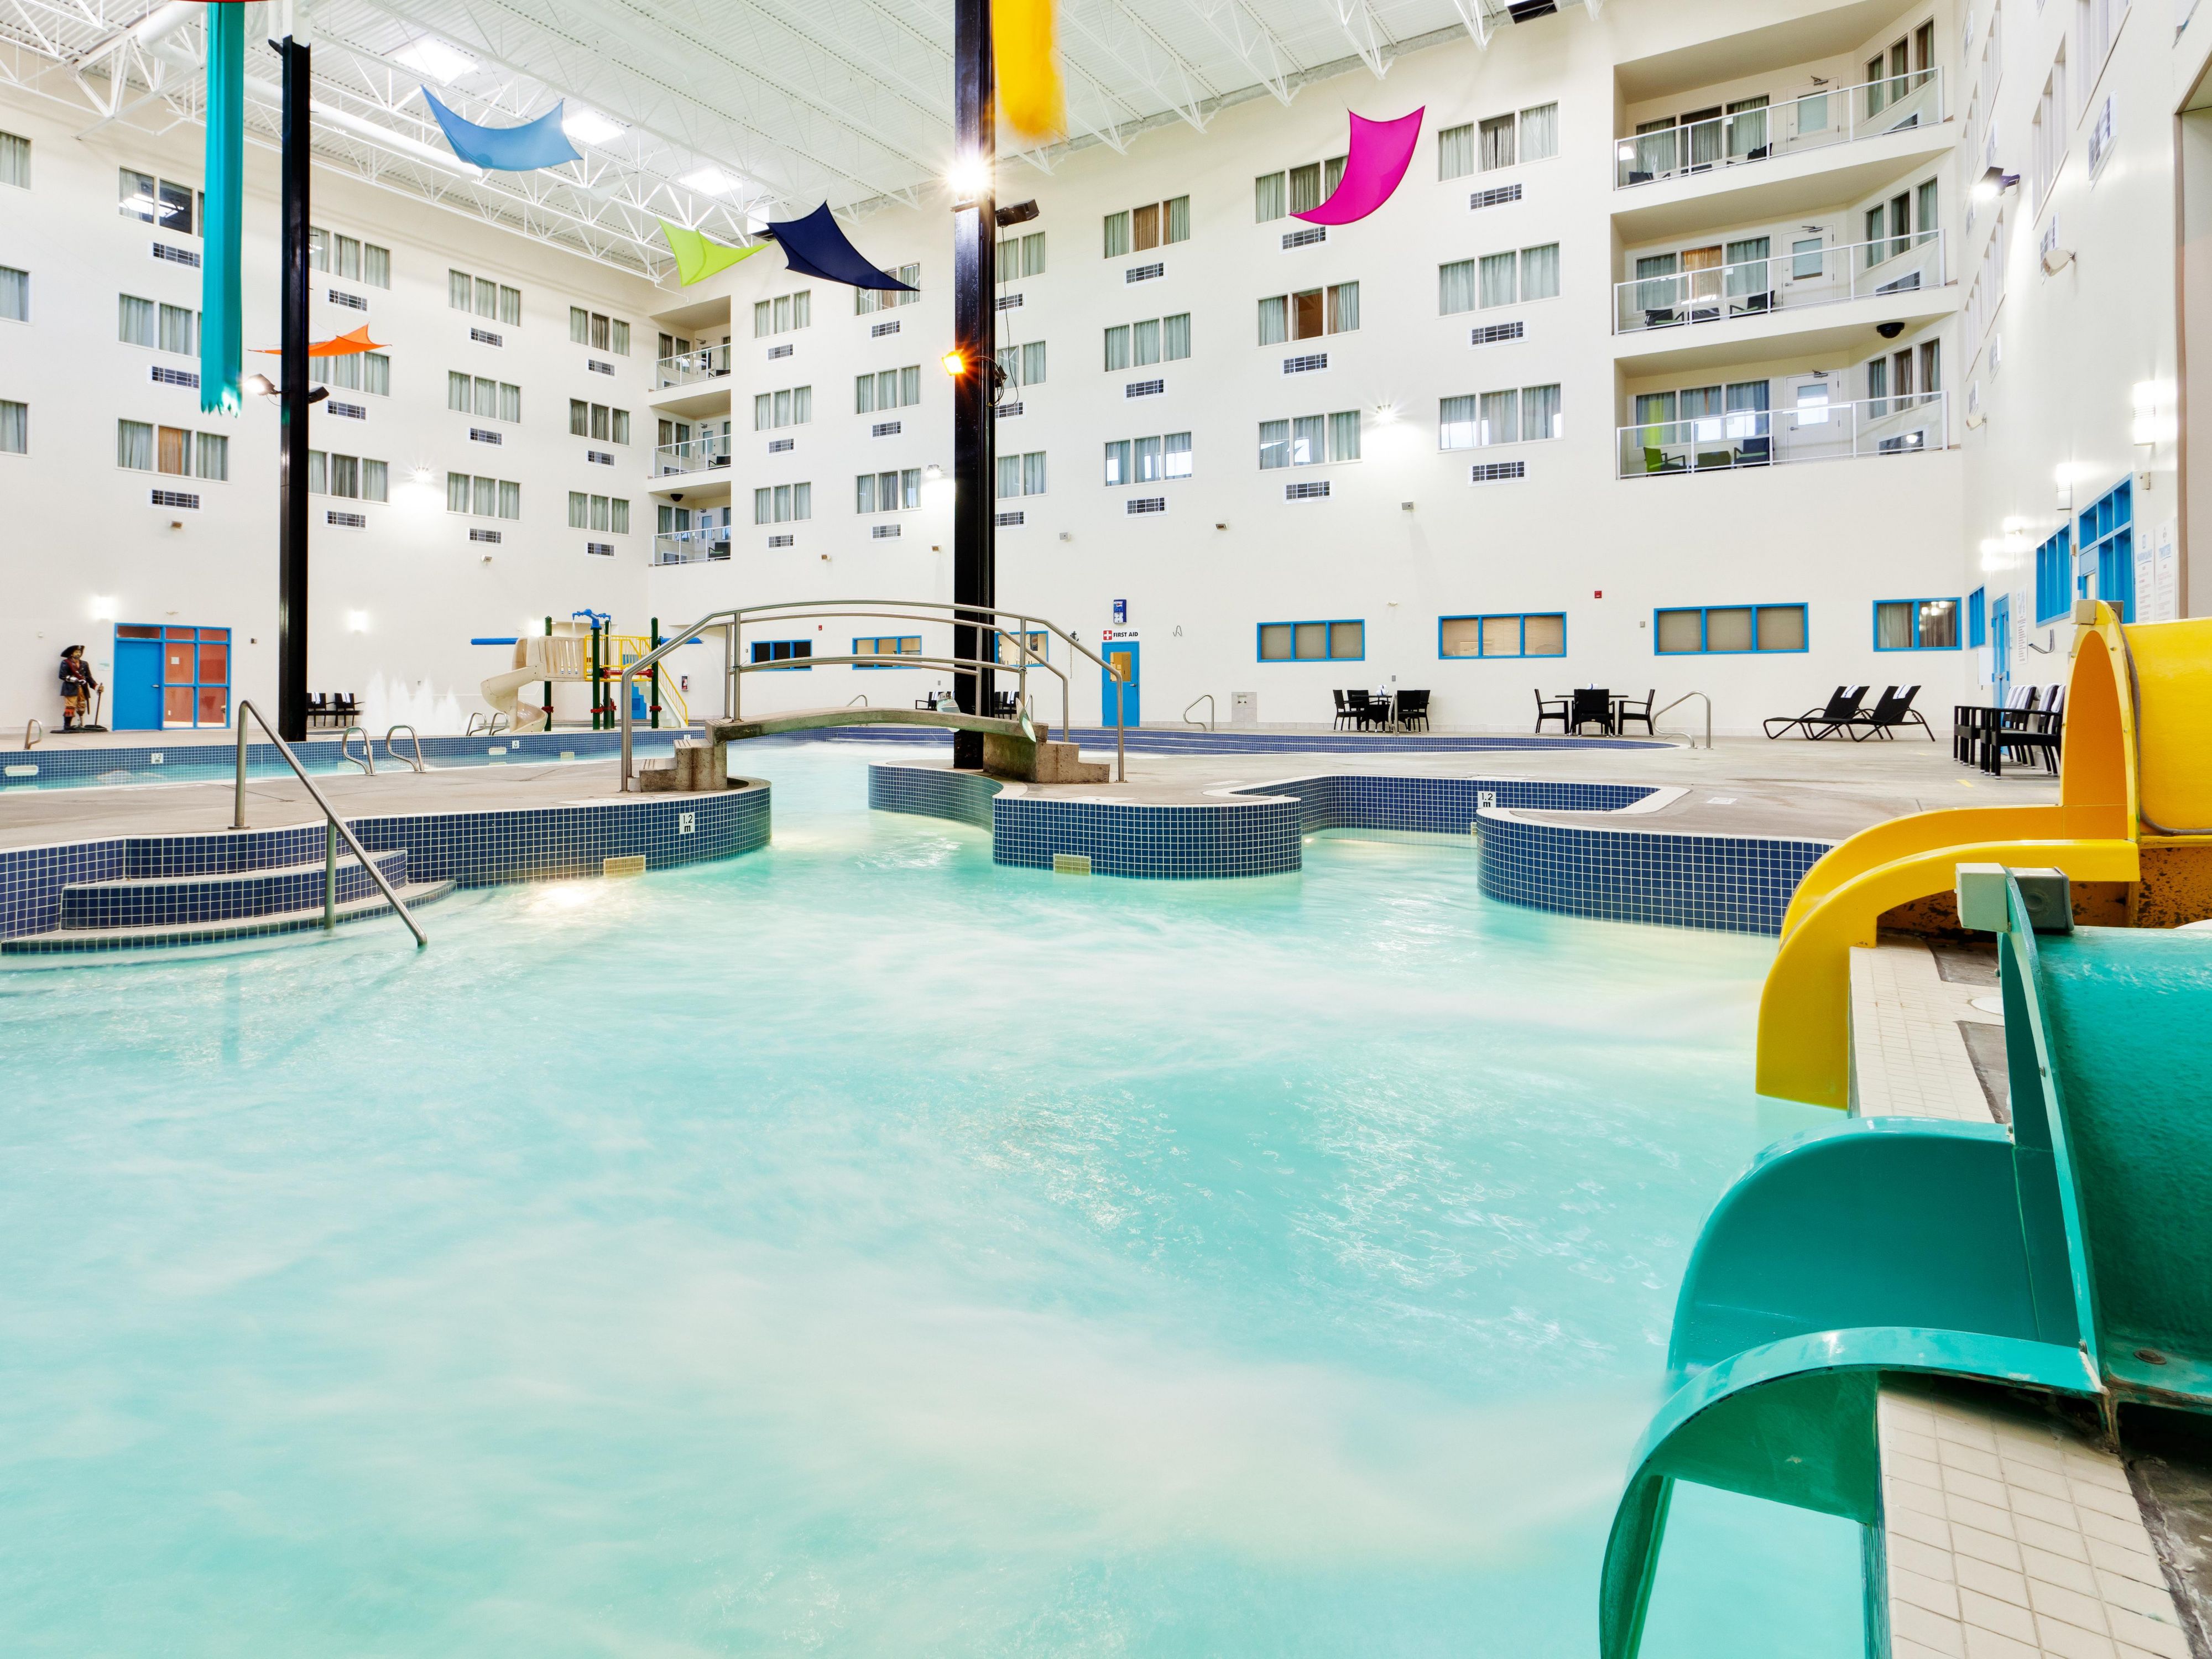 Holiday Inn Lethbridge offers more than just a stay – it's a gateway to Mariner's Cove Waterpark, where guests can make a splash in the wave pool, thrilling waterslides, and kid's splash zone. Perfect for birthday parties and celebrations!